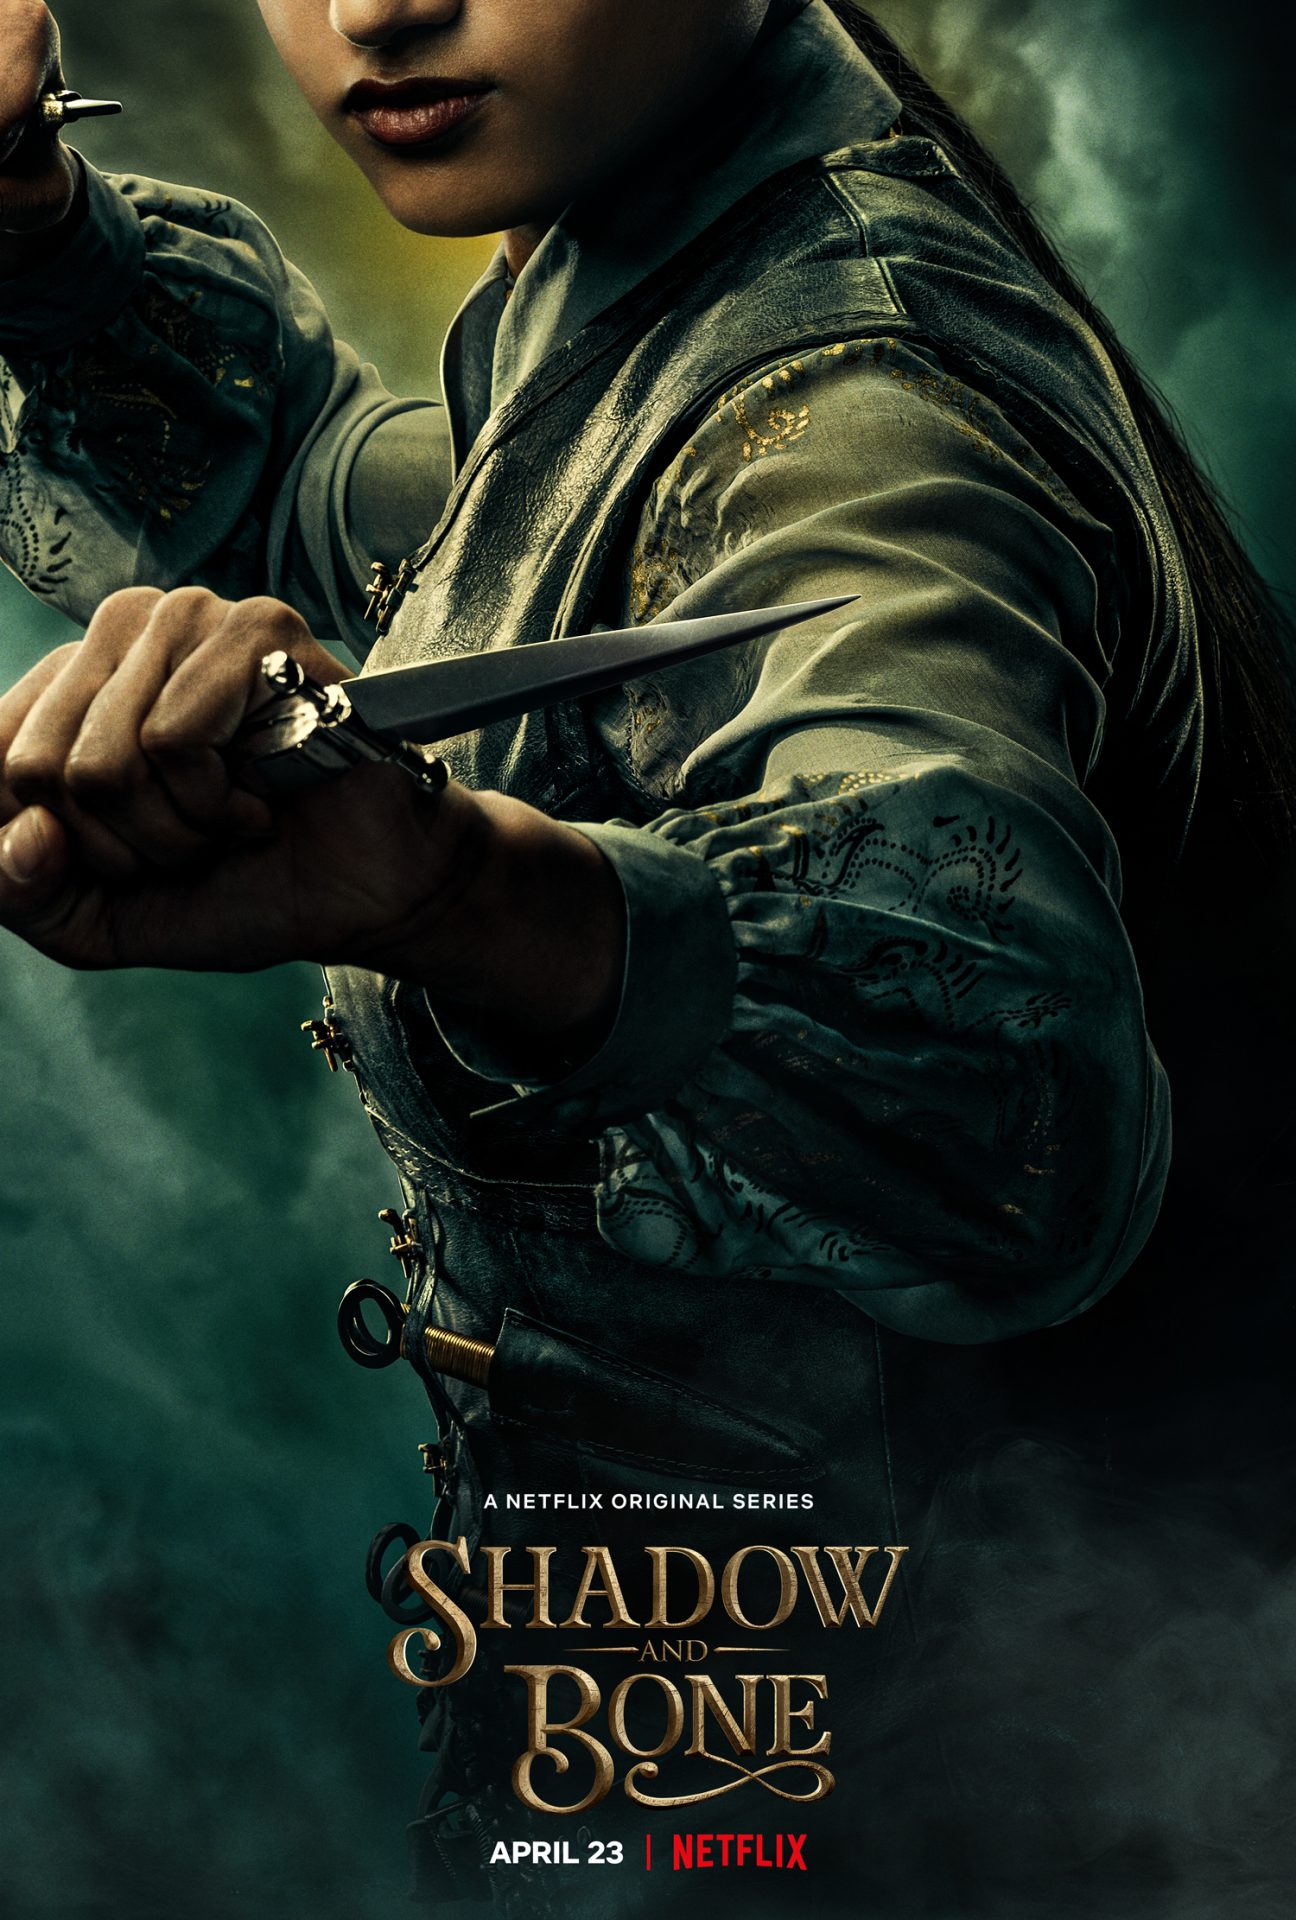 Inej Ghafa character poster for Shadow and Bone